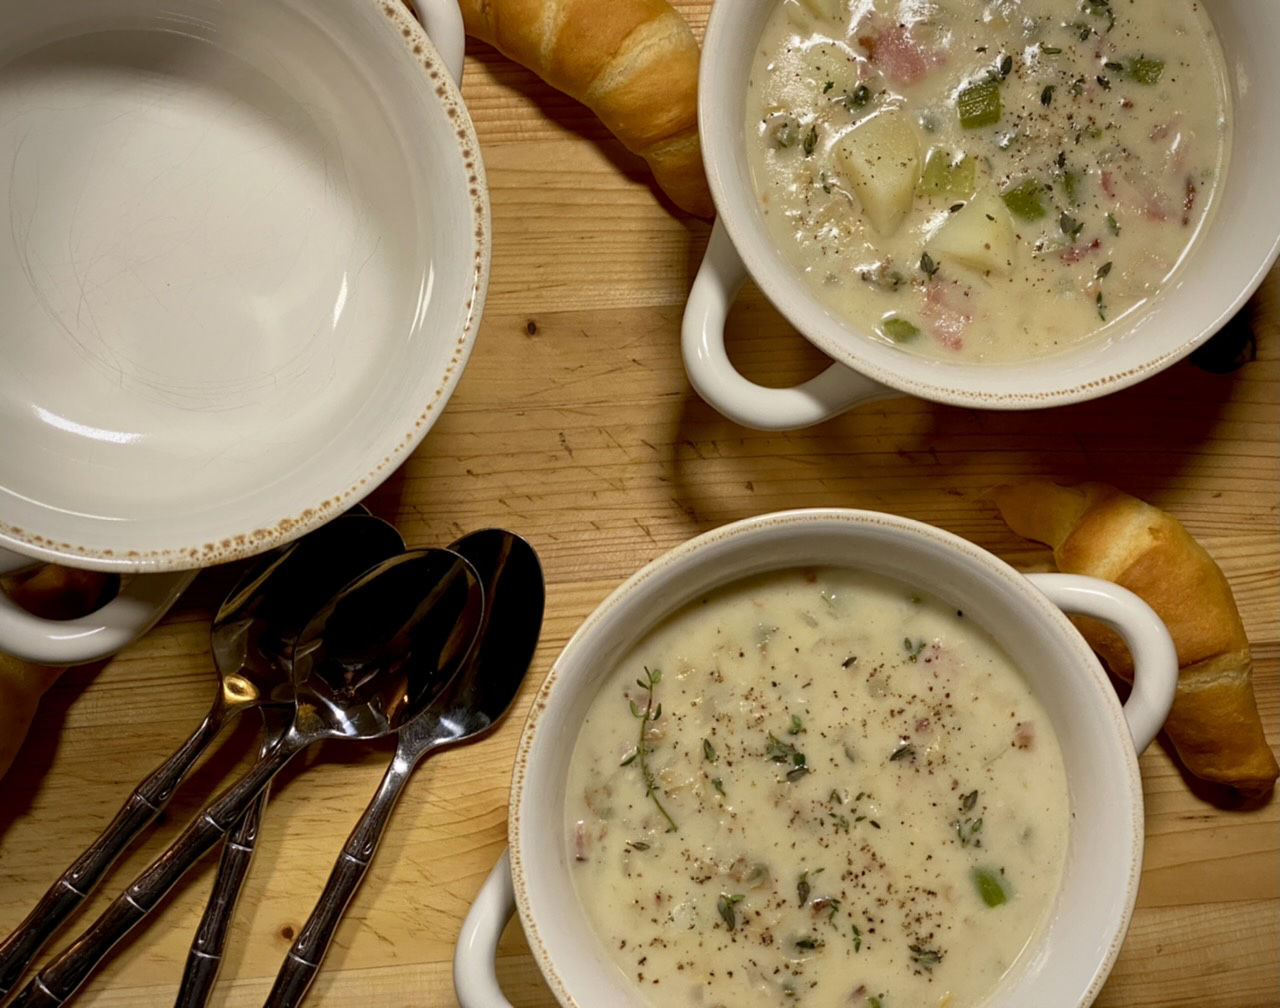 Two bowls of New England clam chowder on top of a wooden cutting board with spoons and crescent rolls